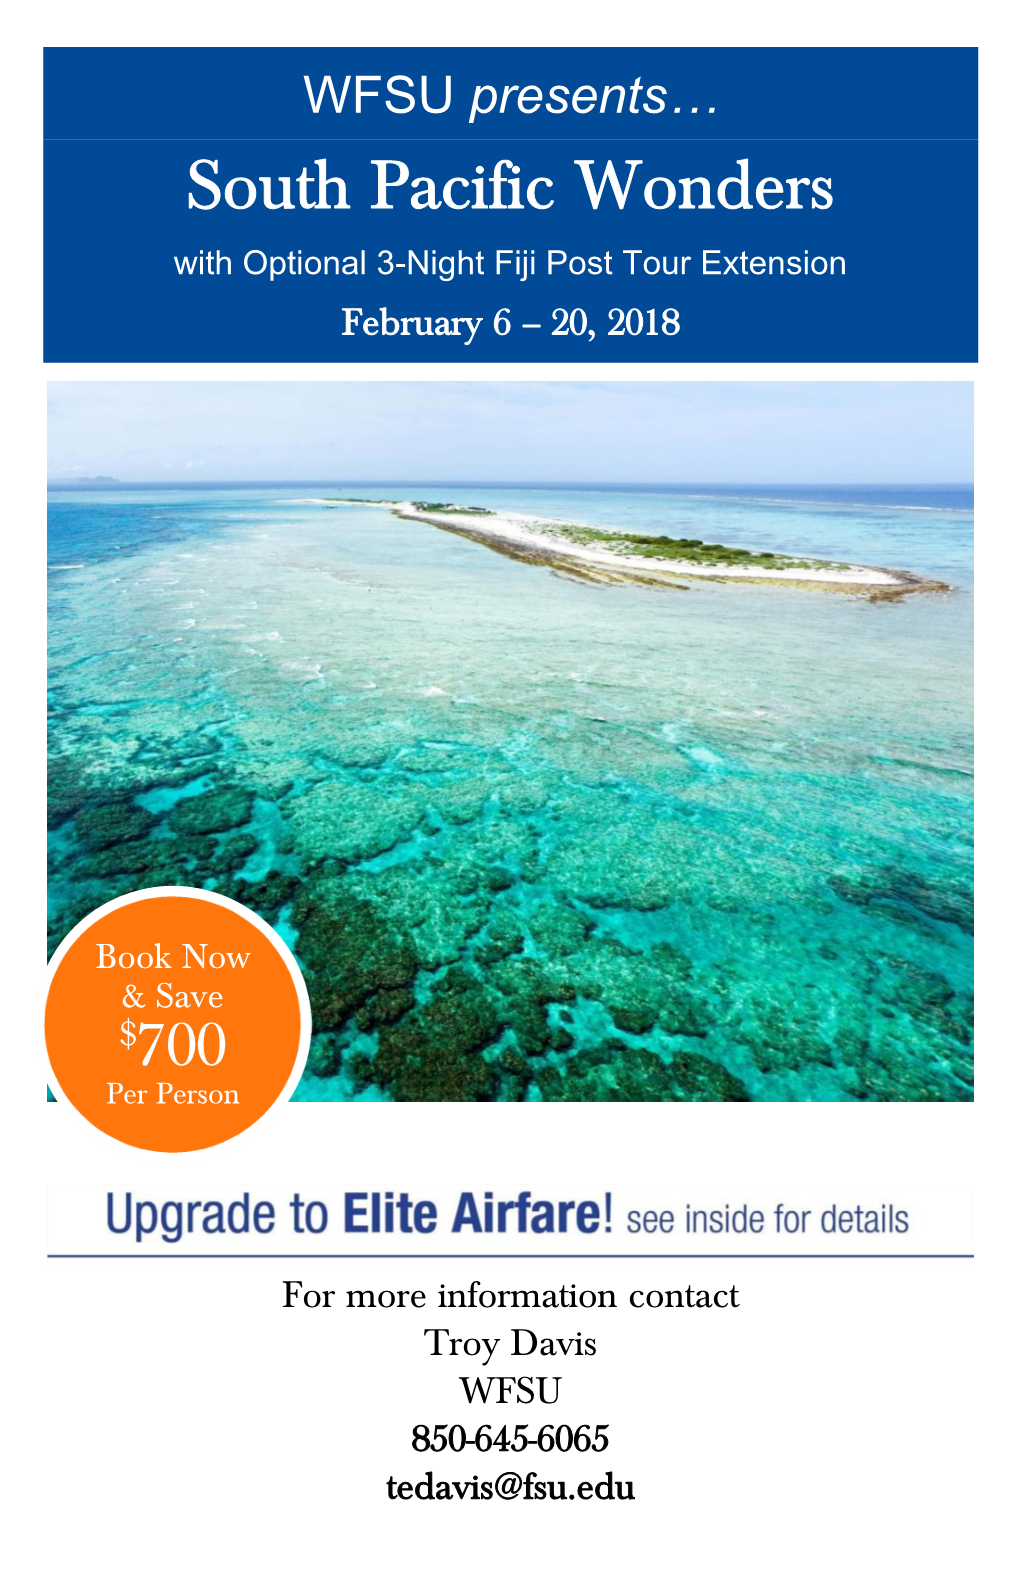 South Pacific Wonders with Optional 3-Night Fiji Post Tour Extension February 6 – 20, 2018